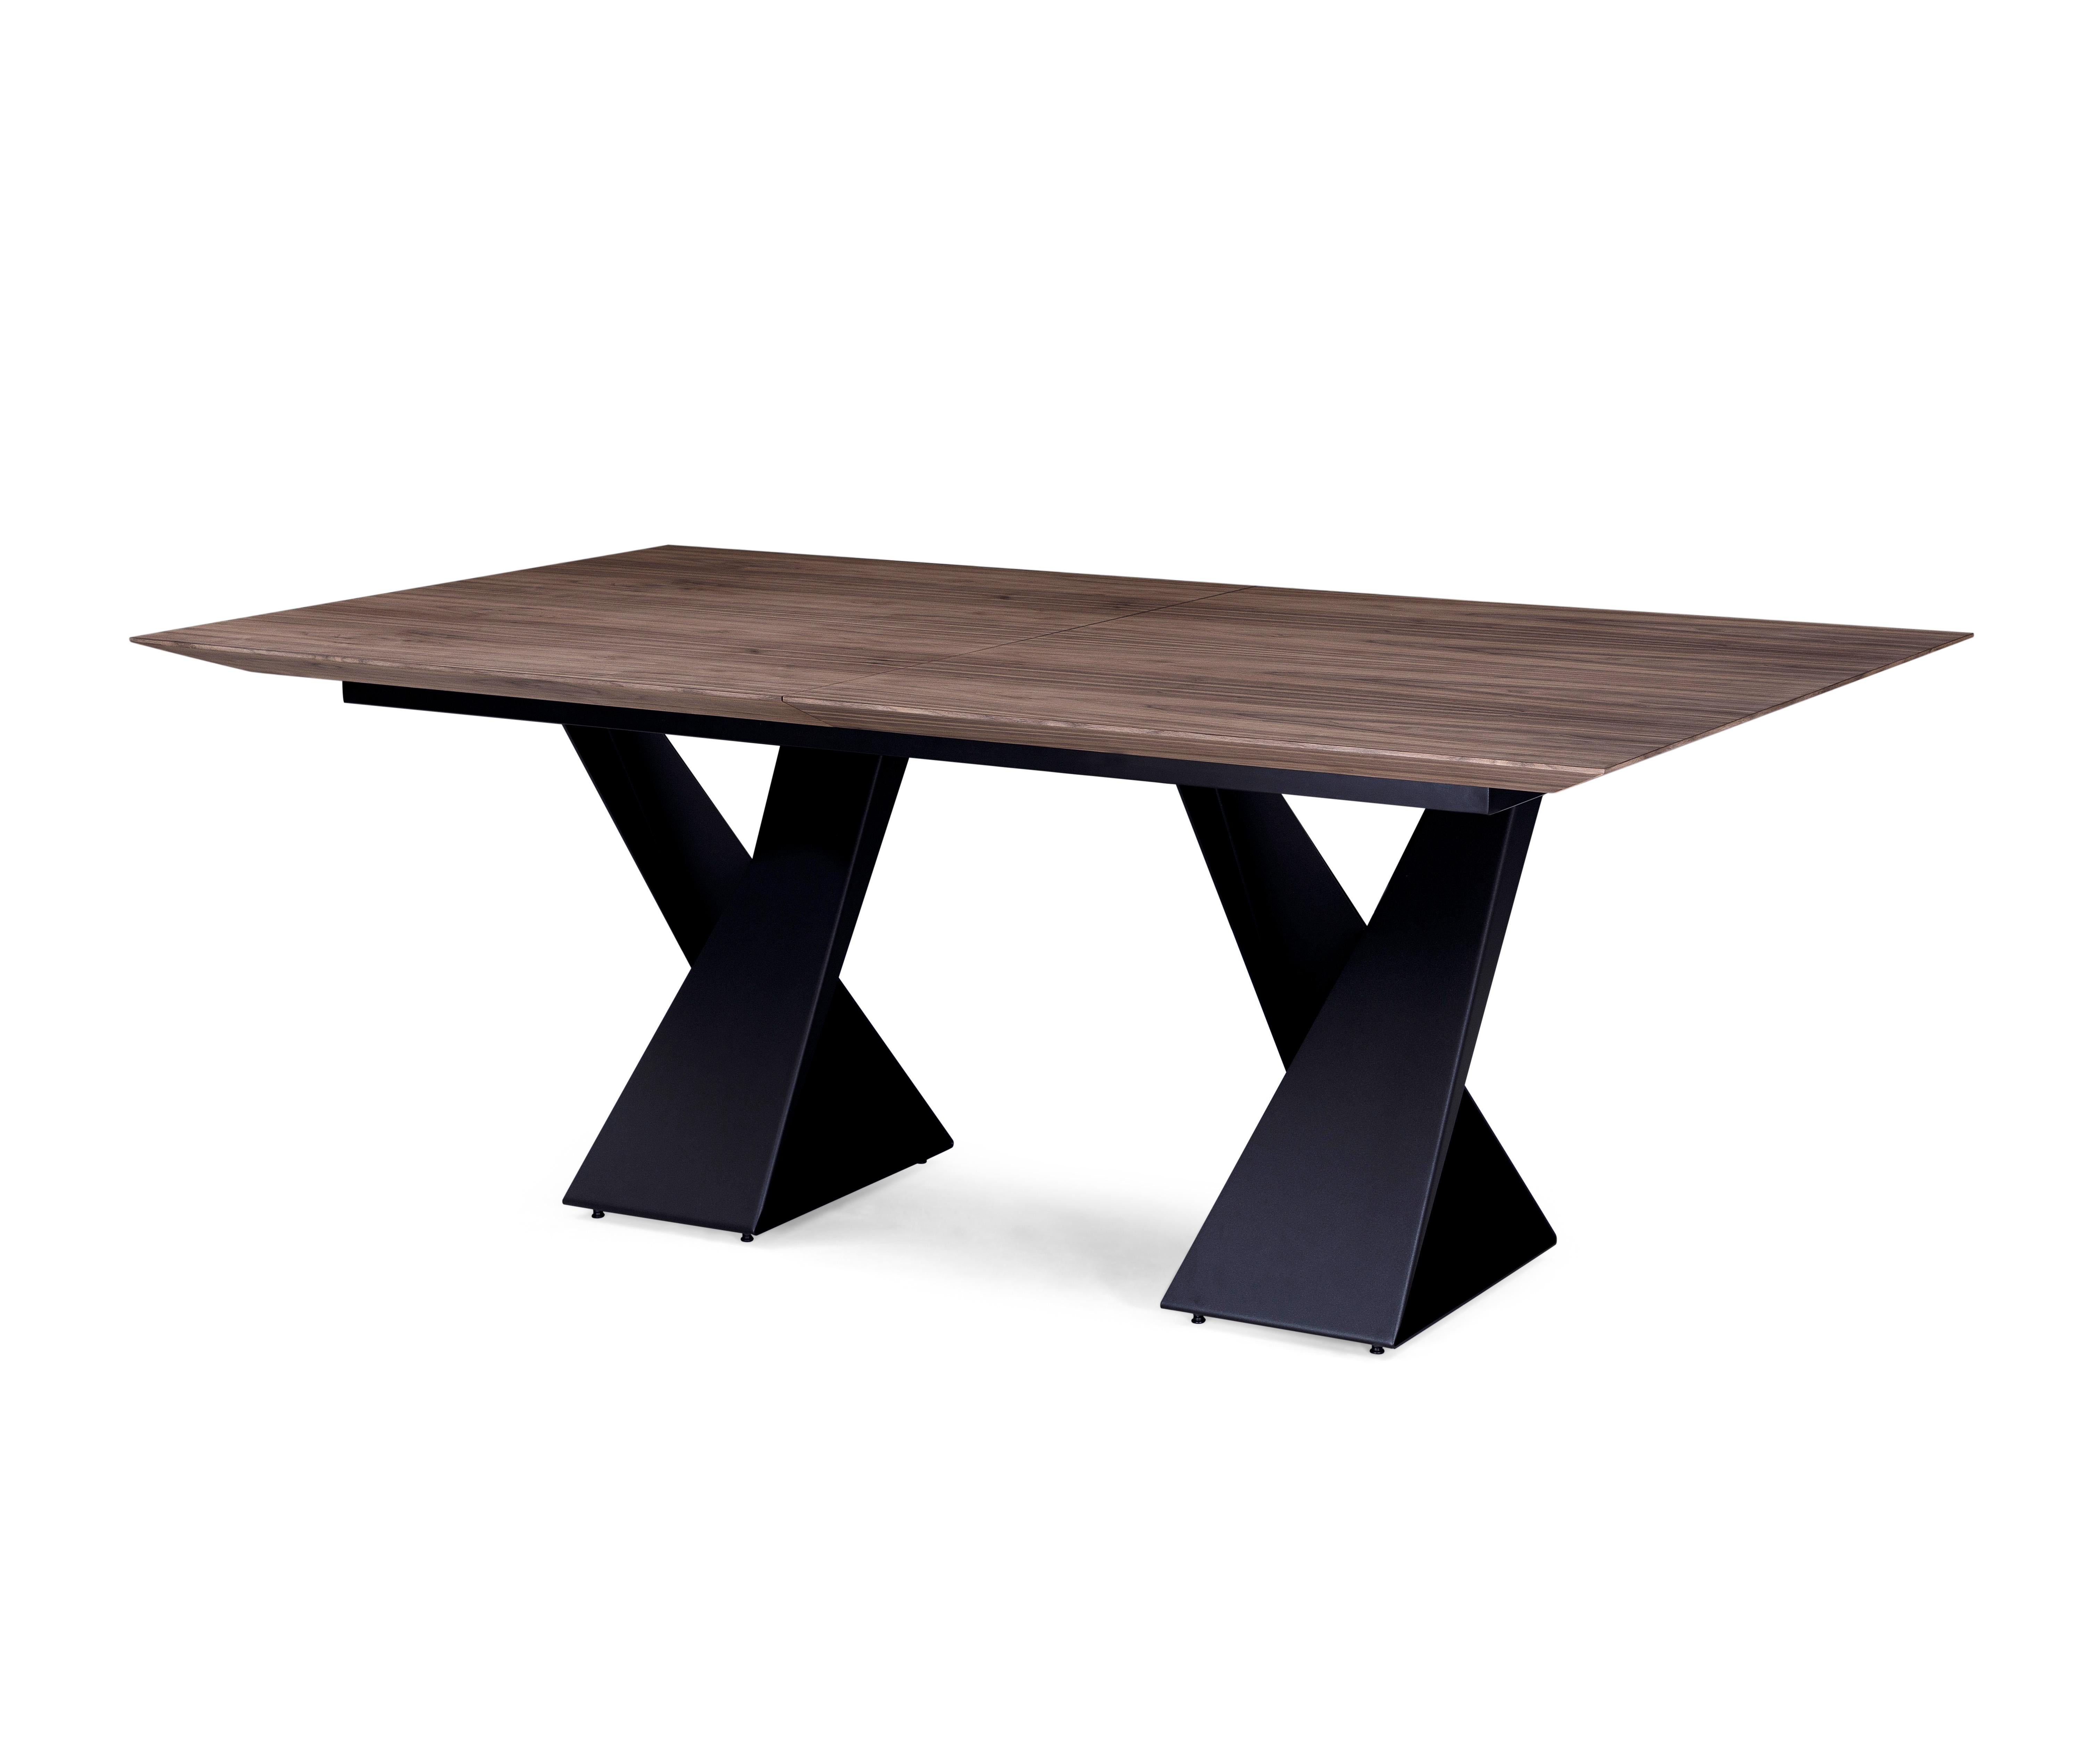 Uultis design team has manufactured the Cronos dining table in a walnut finish top with metal folding feet, perfect for your dreamed dining space. As remarkable and imposing as the God it is named after, the Cronos dining table has a contemporary